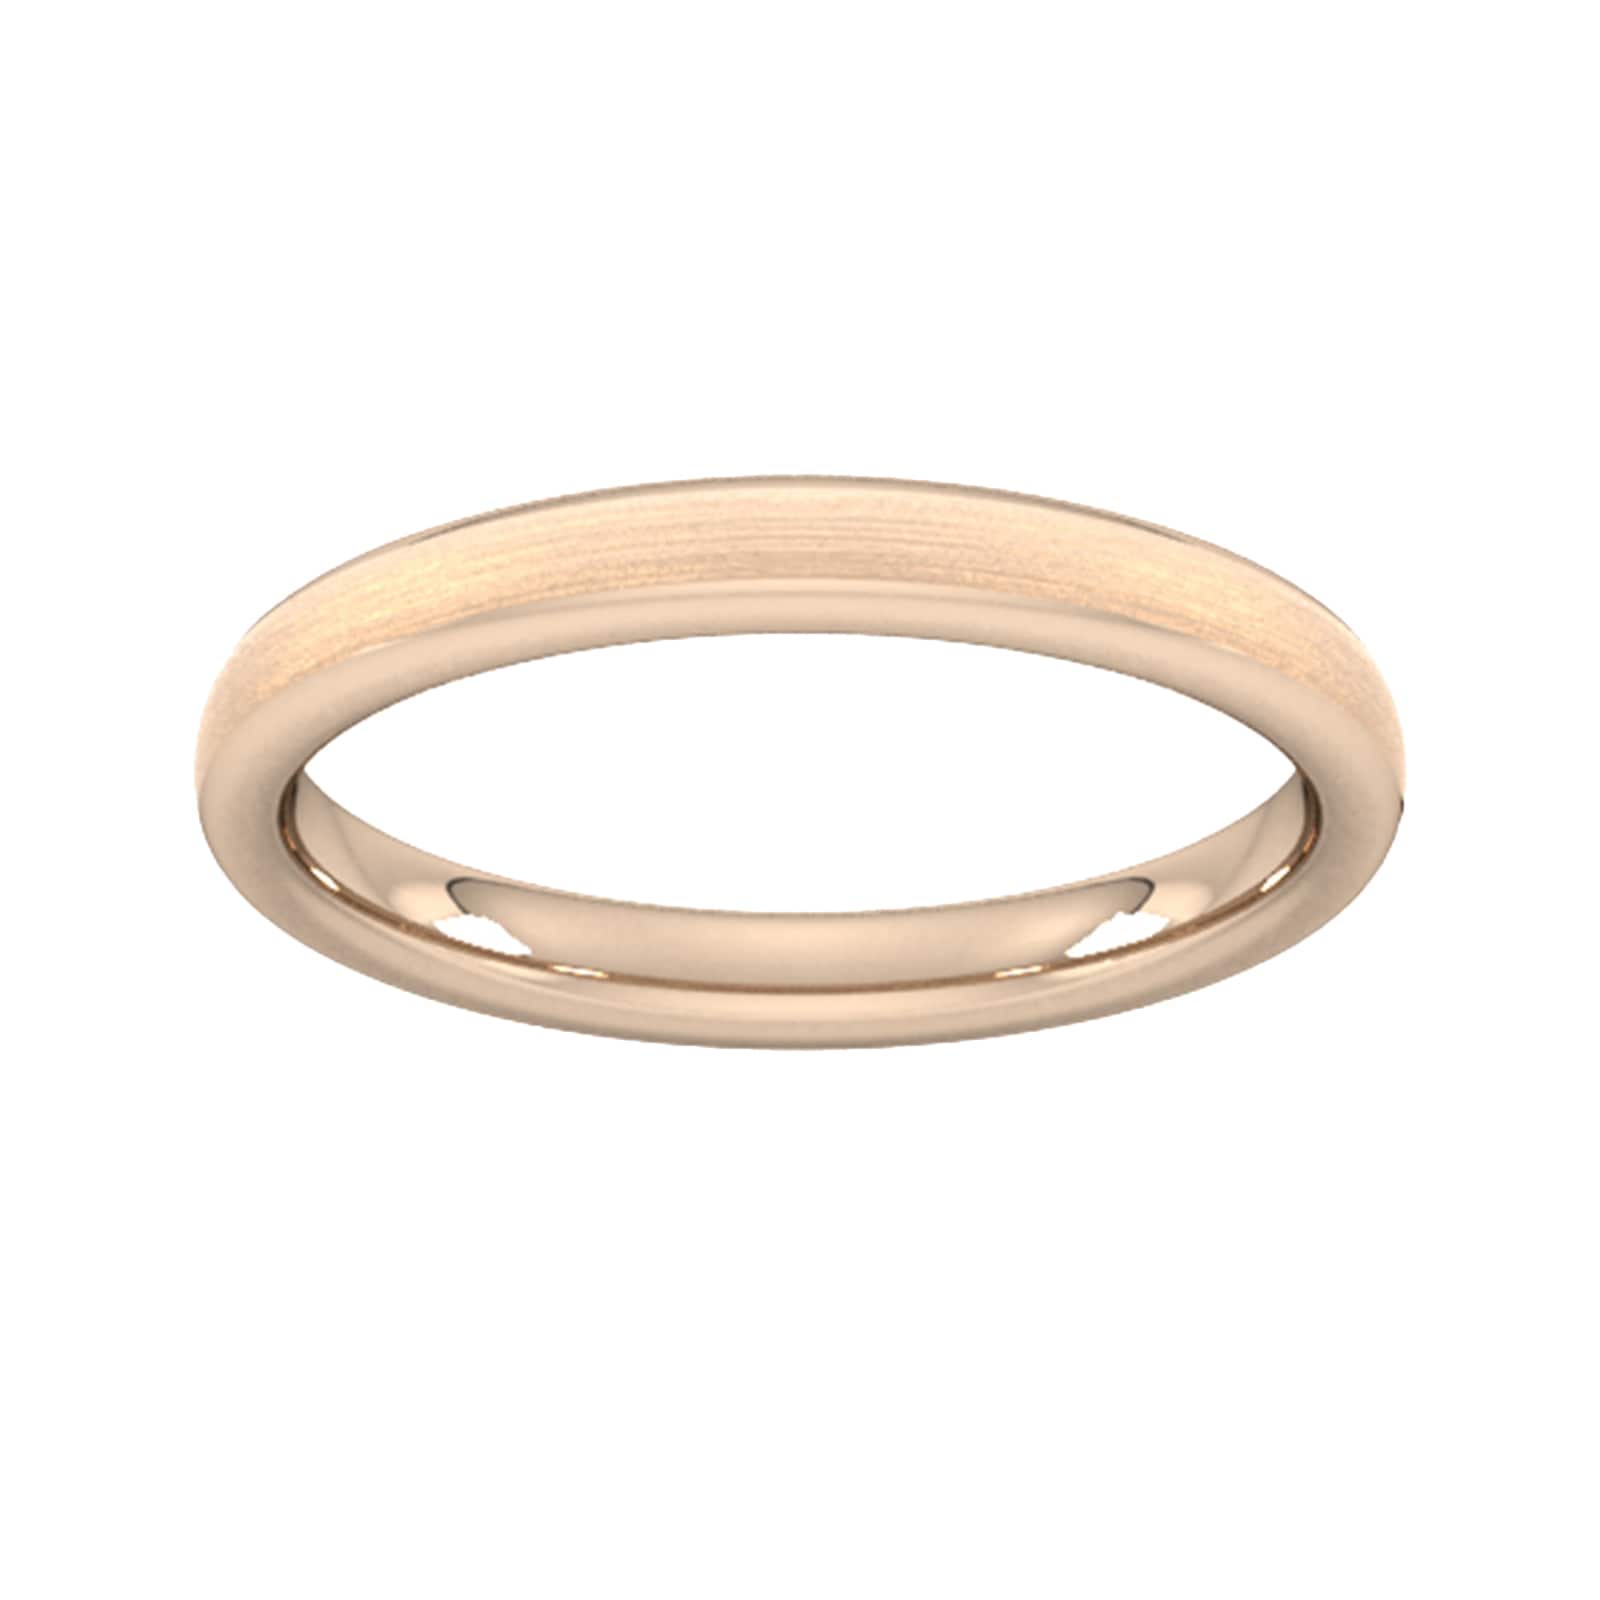 2.5mm D Shape Heavy Matt Finished Wedding Ring In 9 Carat Rose Gold - Ring Size M